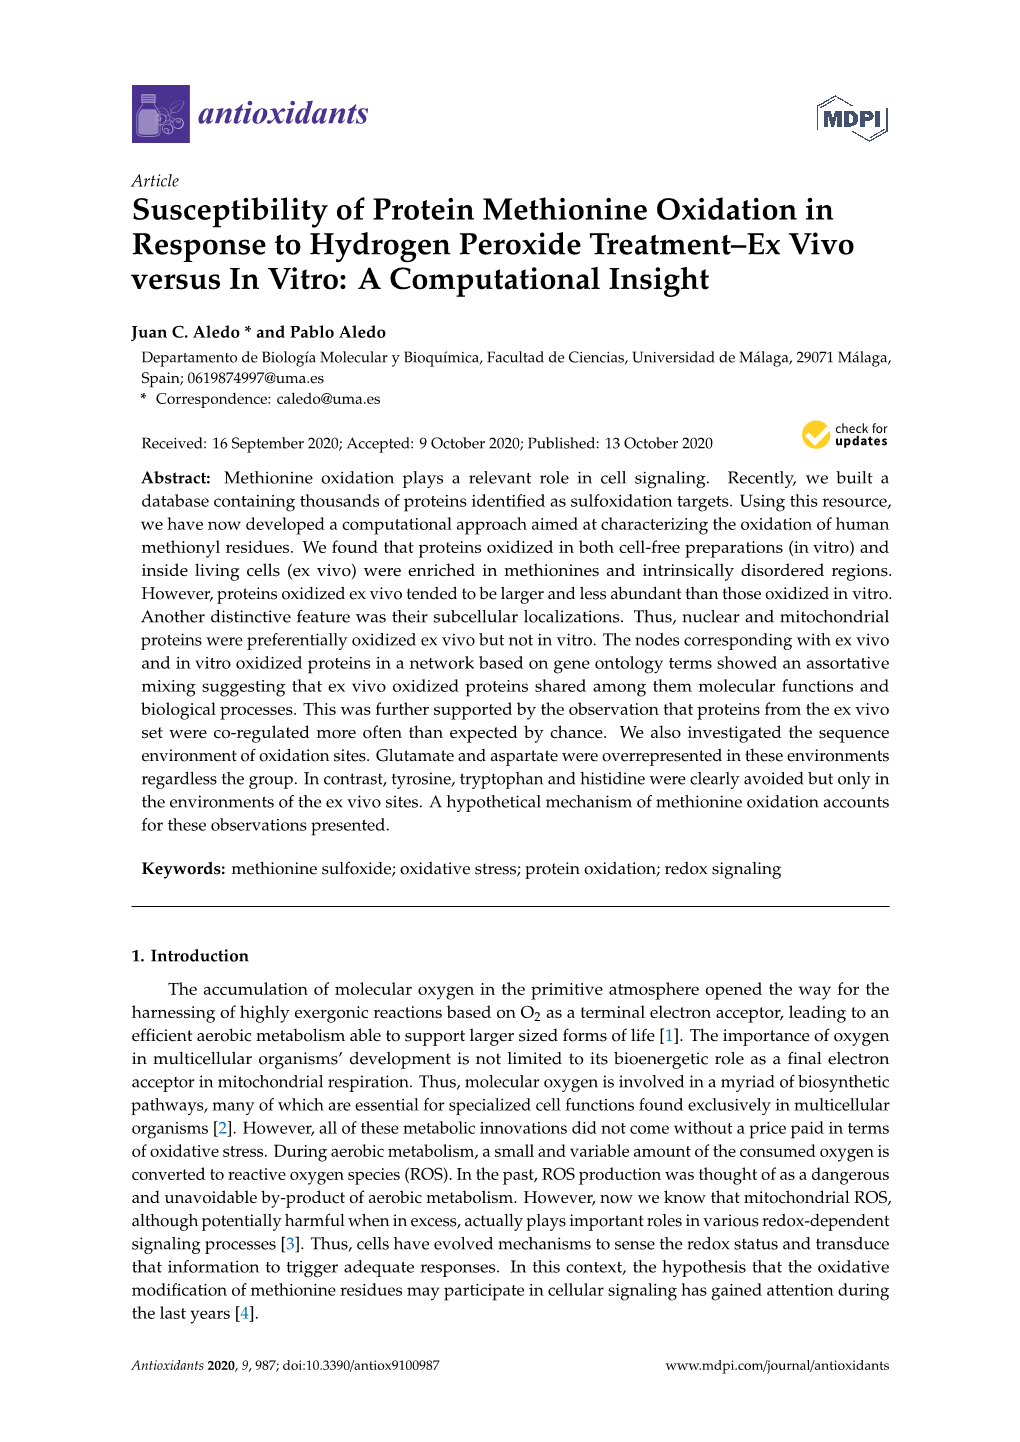 Susceptibility of Protein Methionine Oxidation in Response to Hydrogen Peroxide Treatment–Ex Vivo Versus in Vitro: a Computational Insight